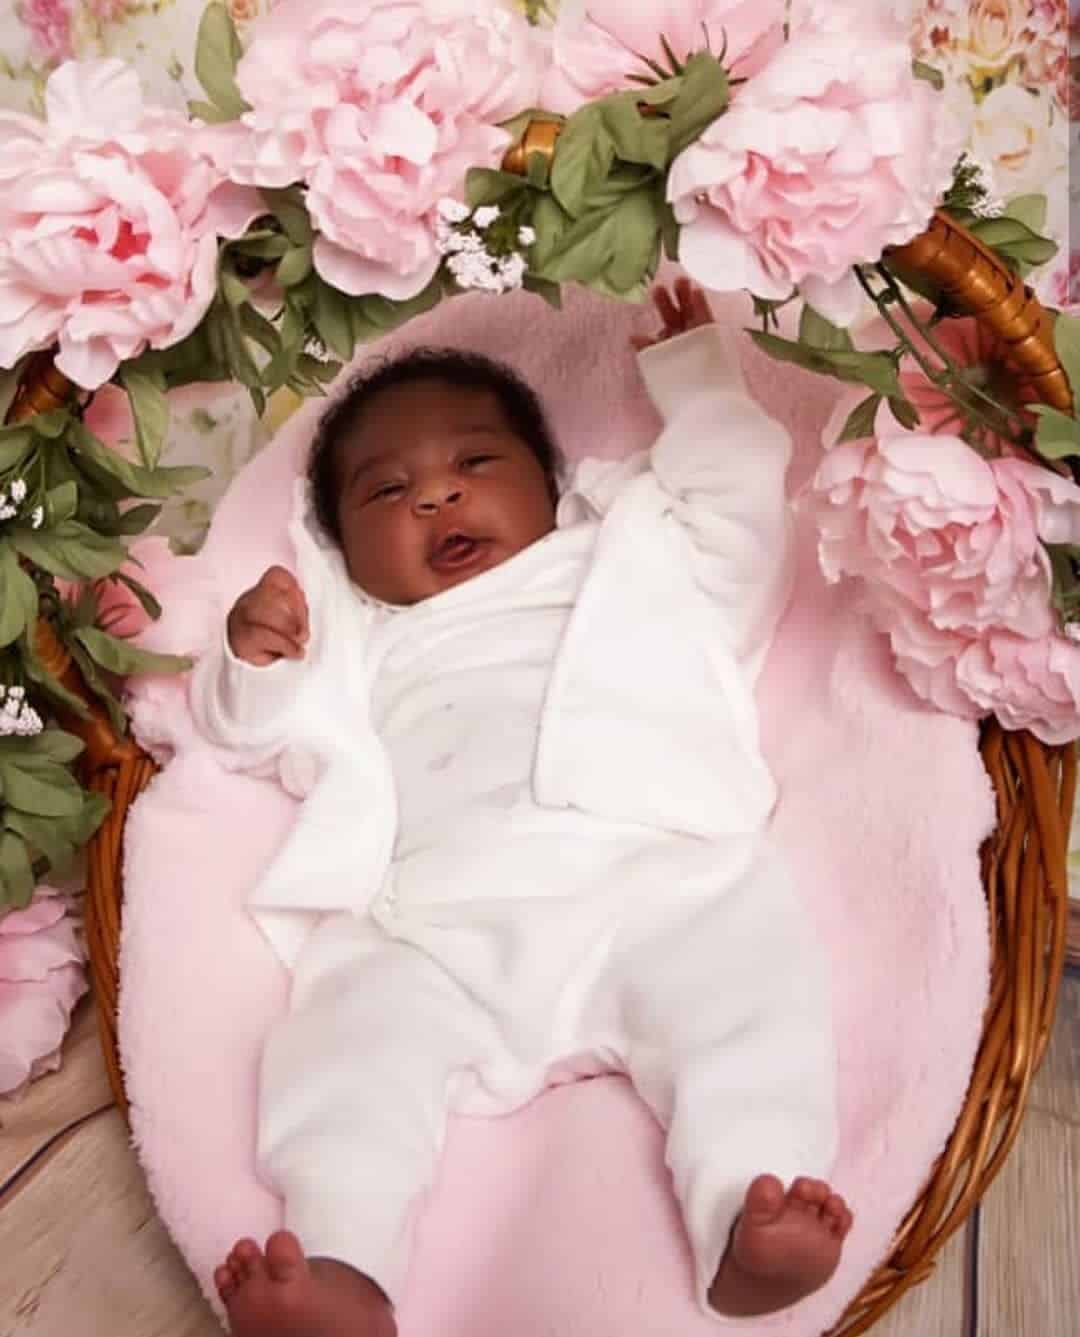 "Our special gift from God" - Mercy Johnson-Okojie shares beautiful photos of her baby, Divine-Mercy